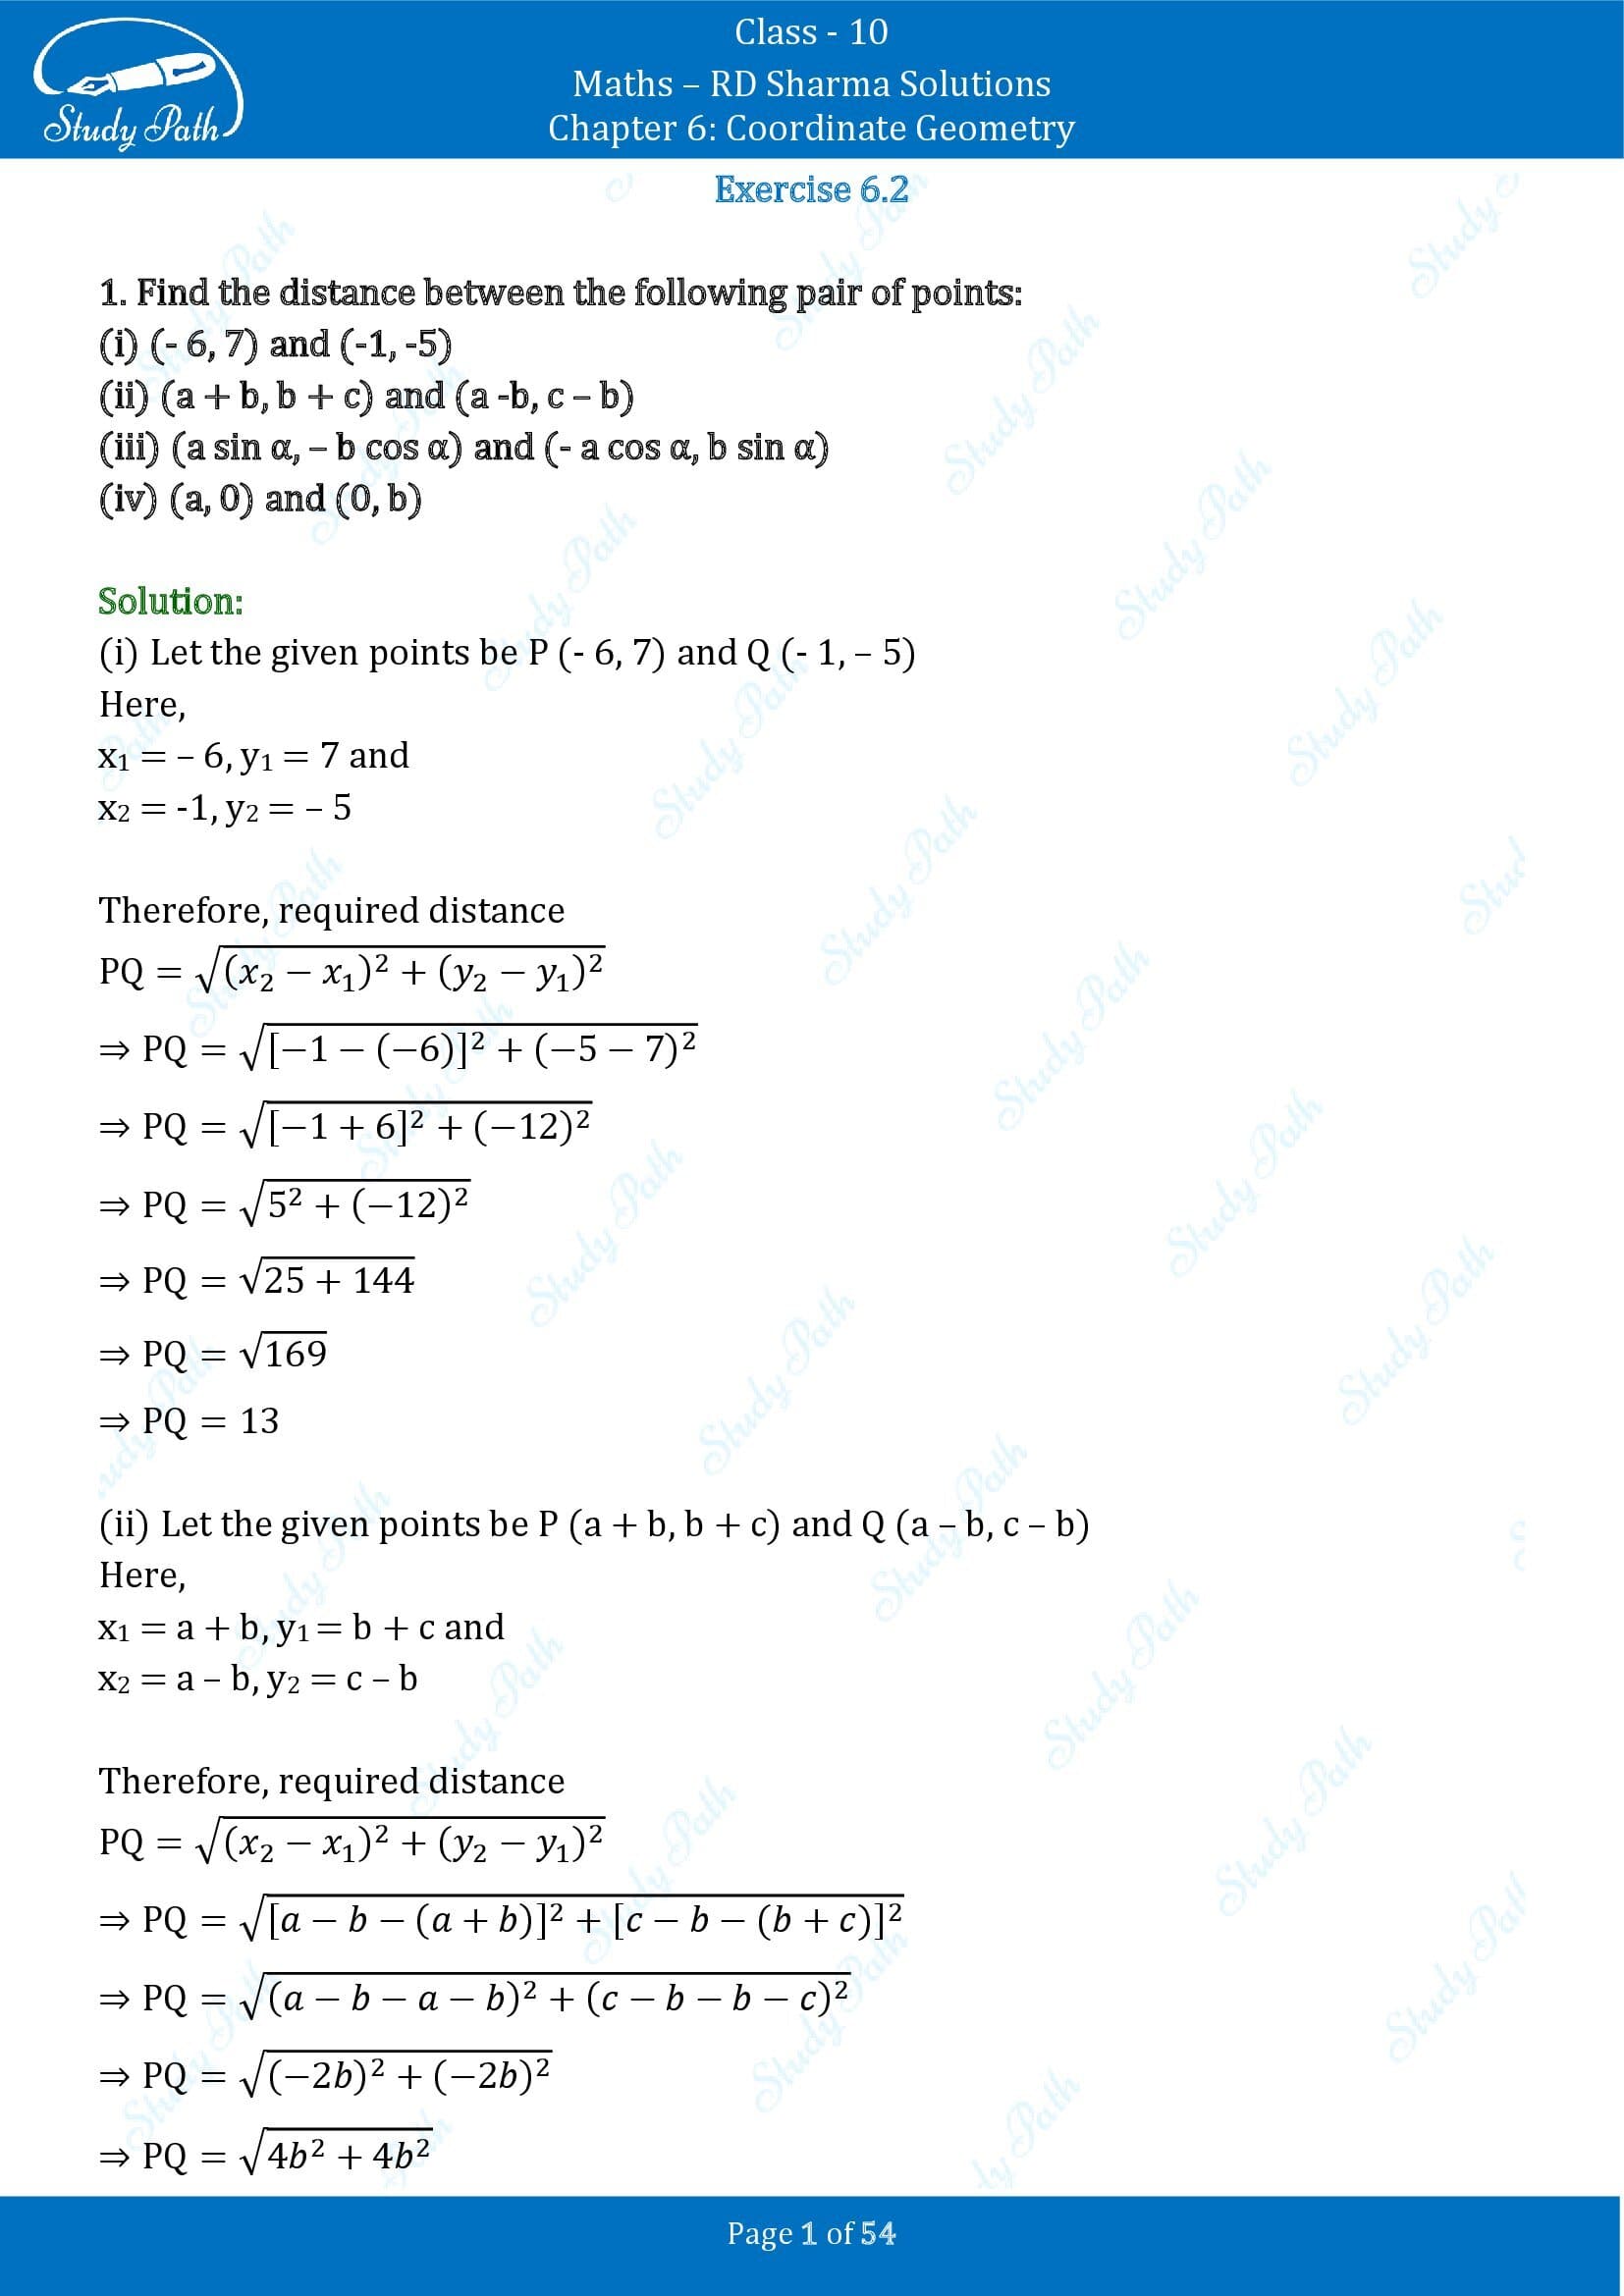 RD Sharma Solutions Class 10 Chapter 6 Coordinate Geometry Exercise 6.2 0001